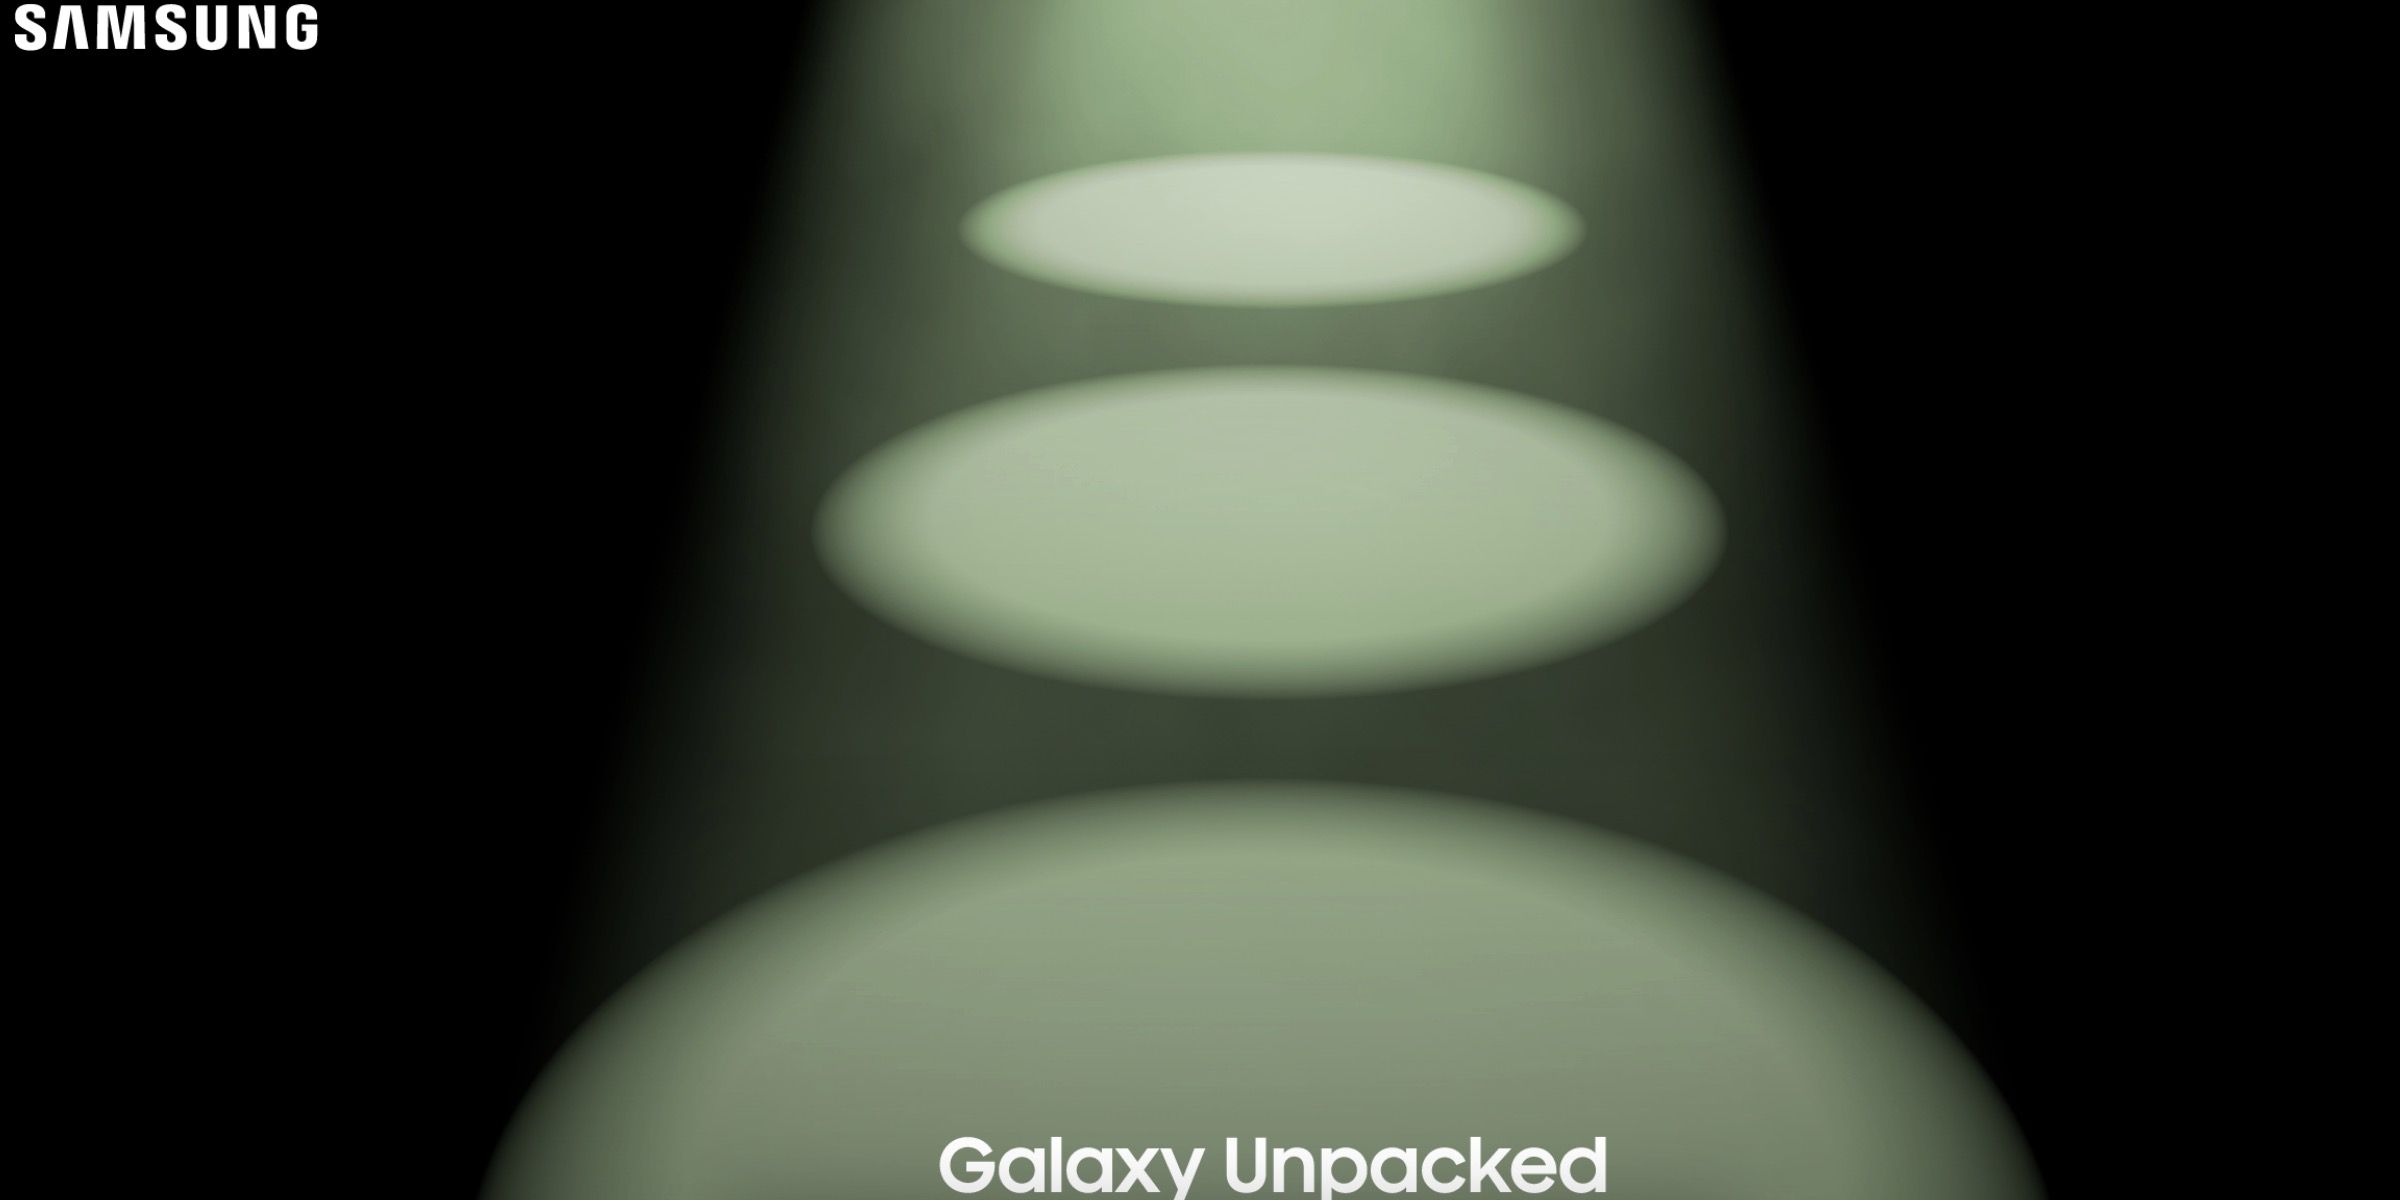 Official teaser image for Samsung Unpacked event.